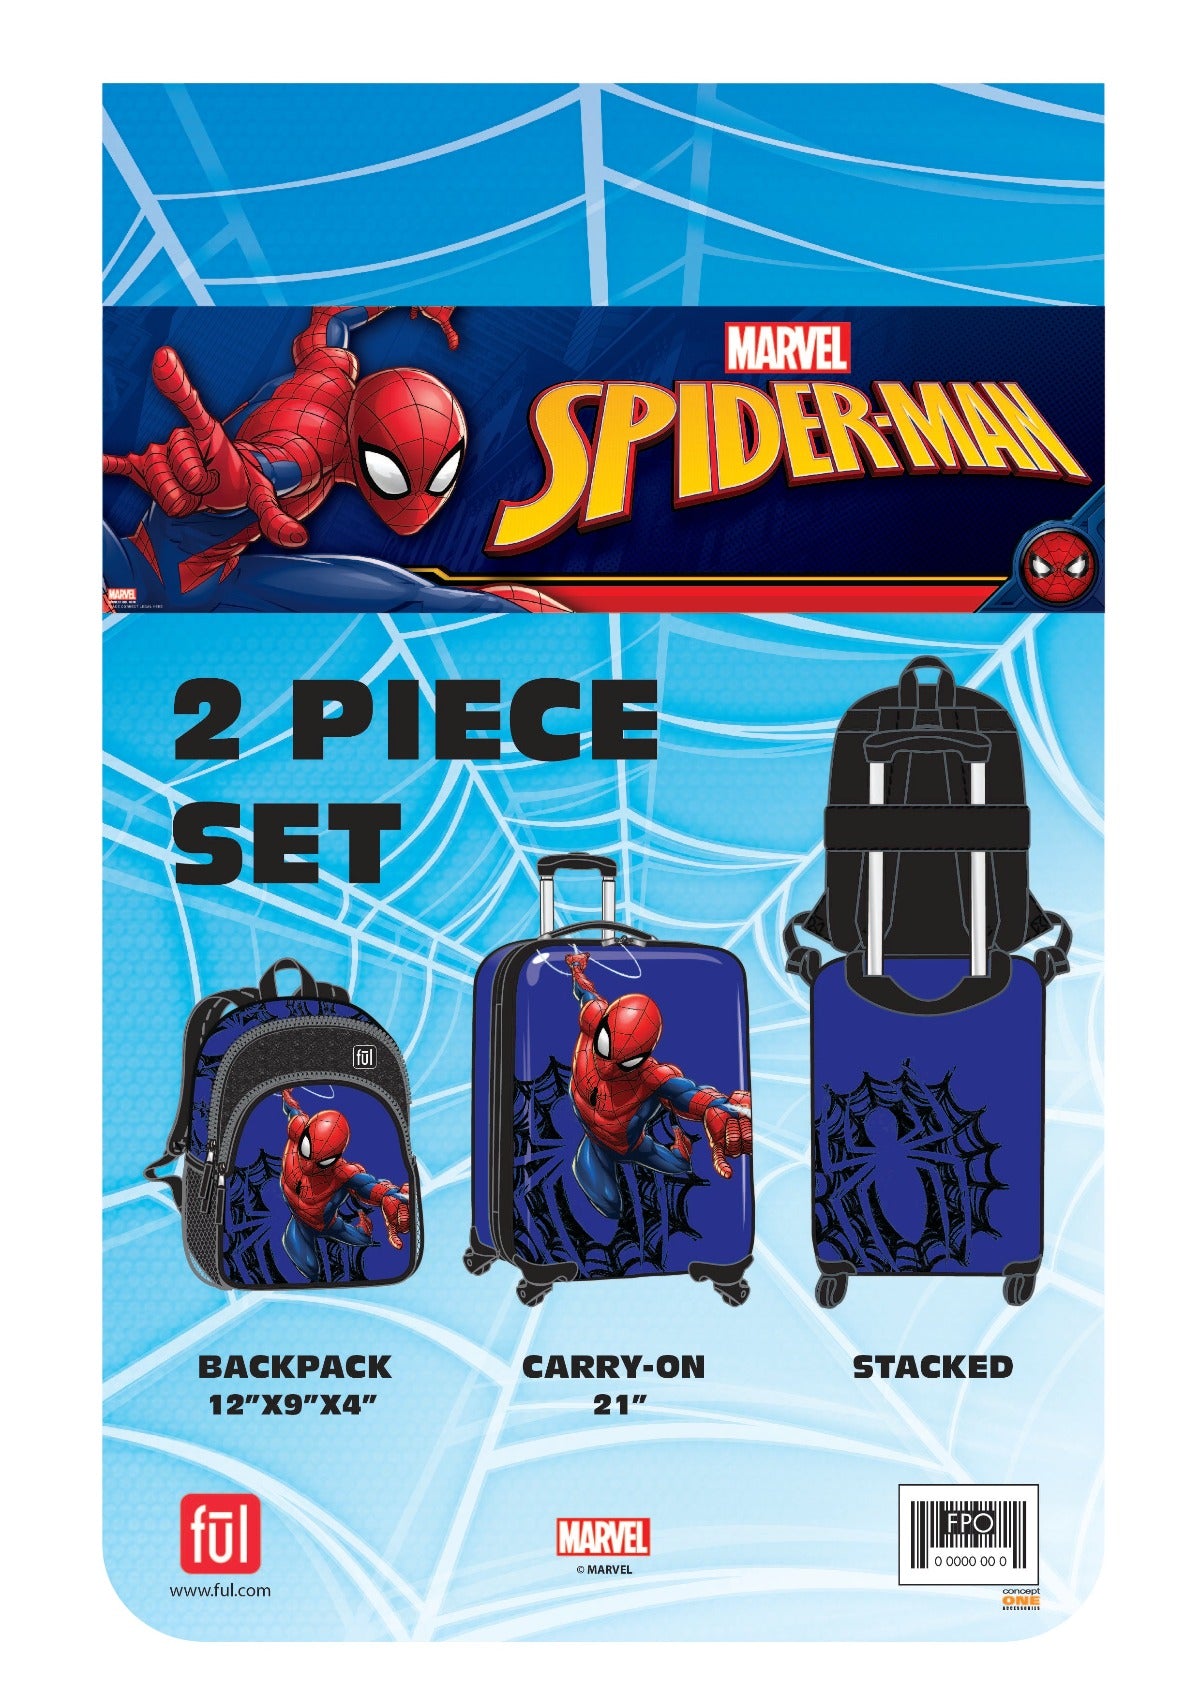 Blue Ful Marvel Spiderman Web matching 2 piece set - 21" carry-on suitcase 13" under seat backpack